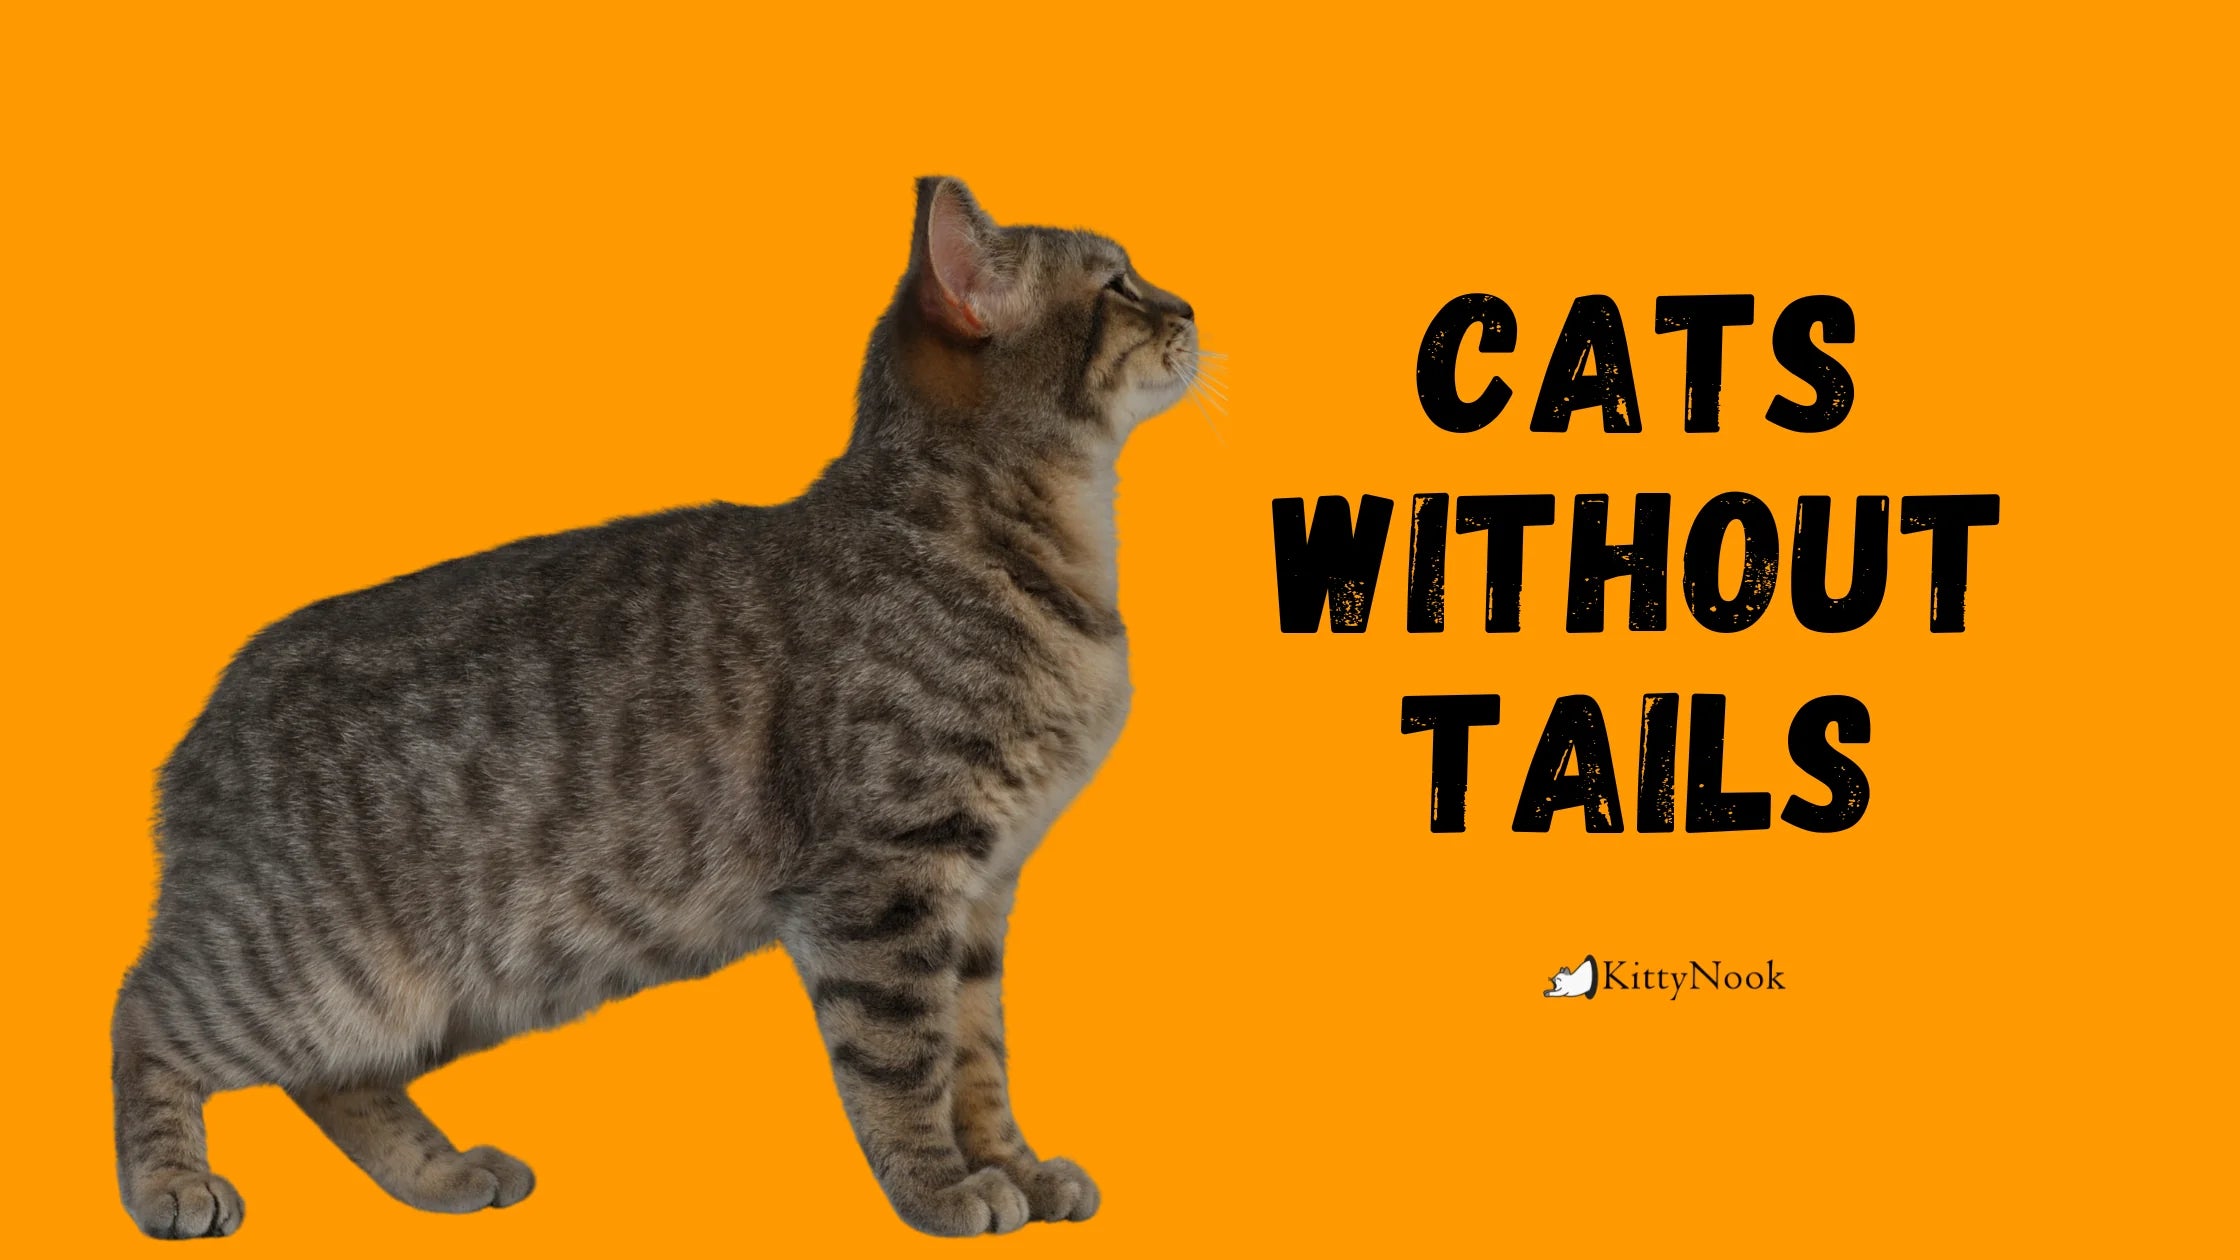 Cats Without Tails - KittyNook Cat Company